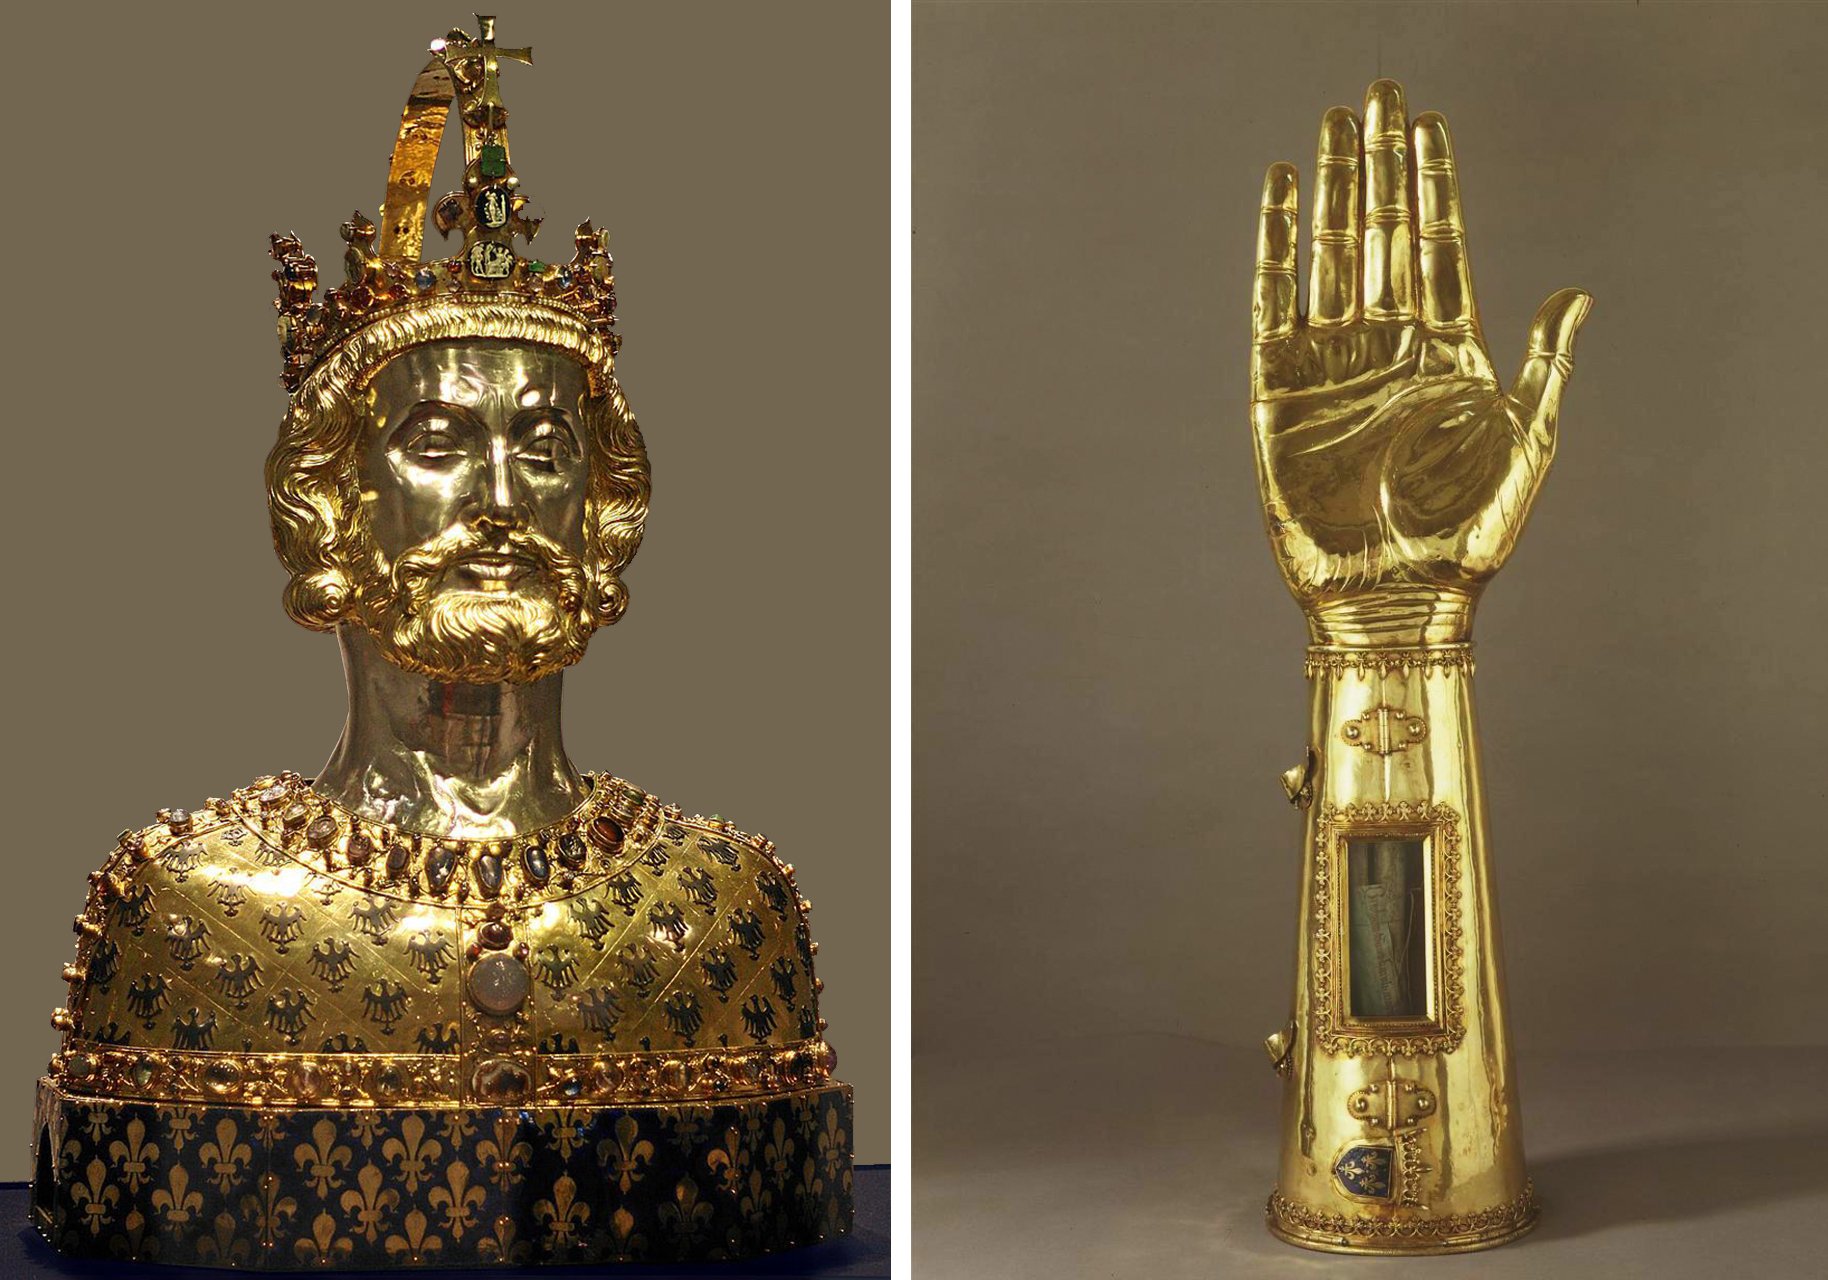 A photo of two golden reliquaries of Charlemagne, a medieval king and emperor. On the left, a golden bust of Charlemagne with a crown, a beard, and a tunic decorated with eagles and jewels. On the right, a golden hand of Charlemagne. Both reliquaries are believed to contain parts of Charlemagne’s bones.